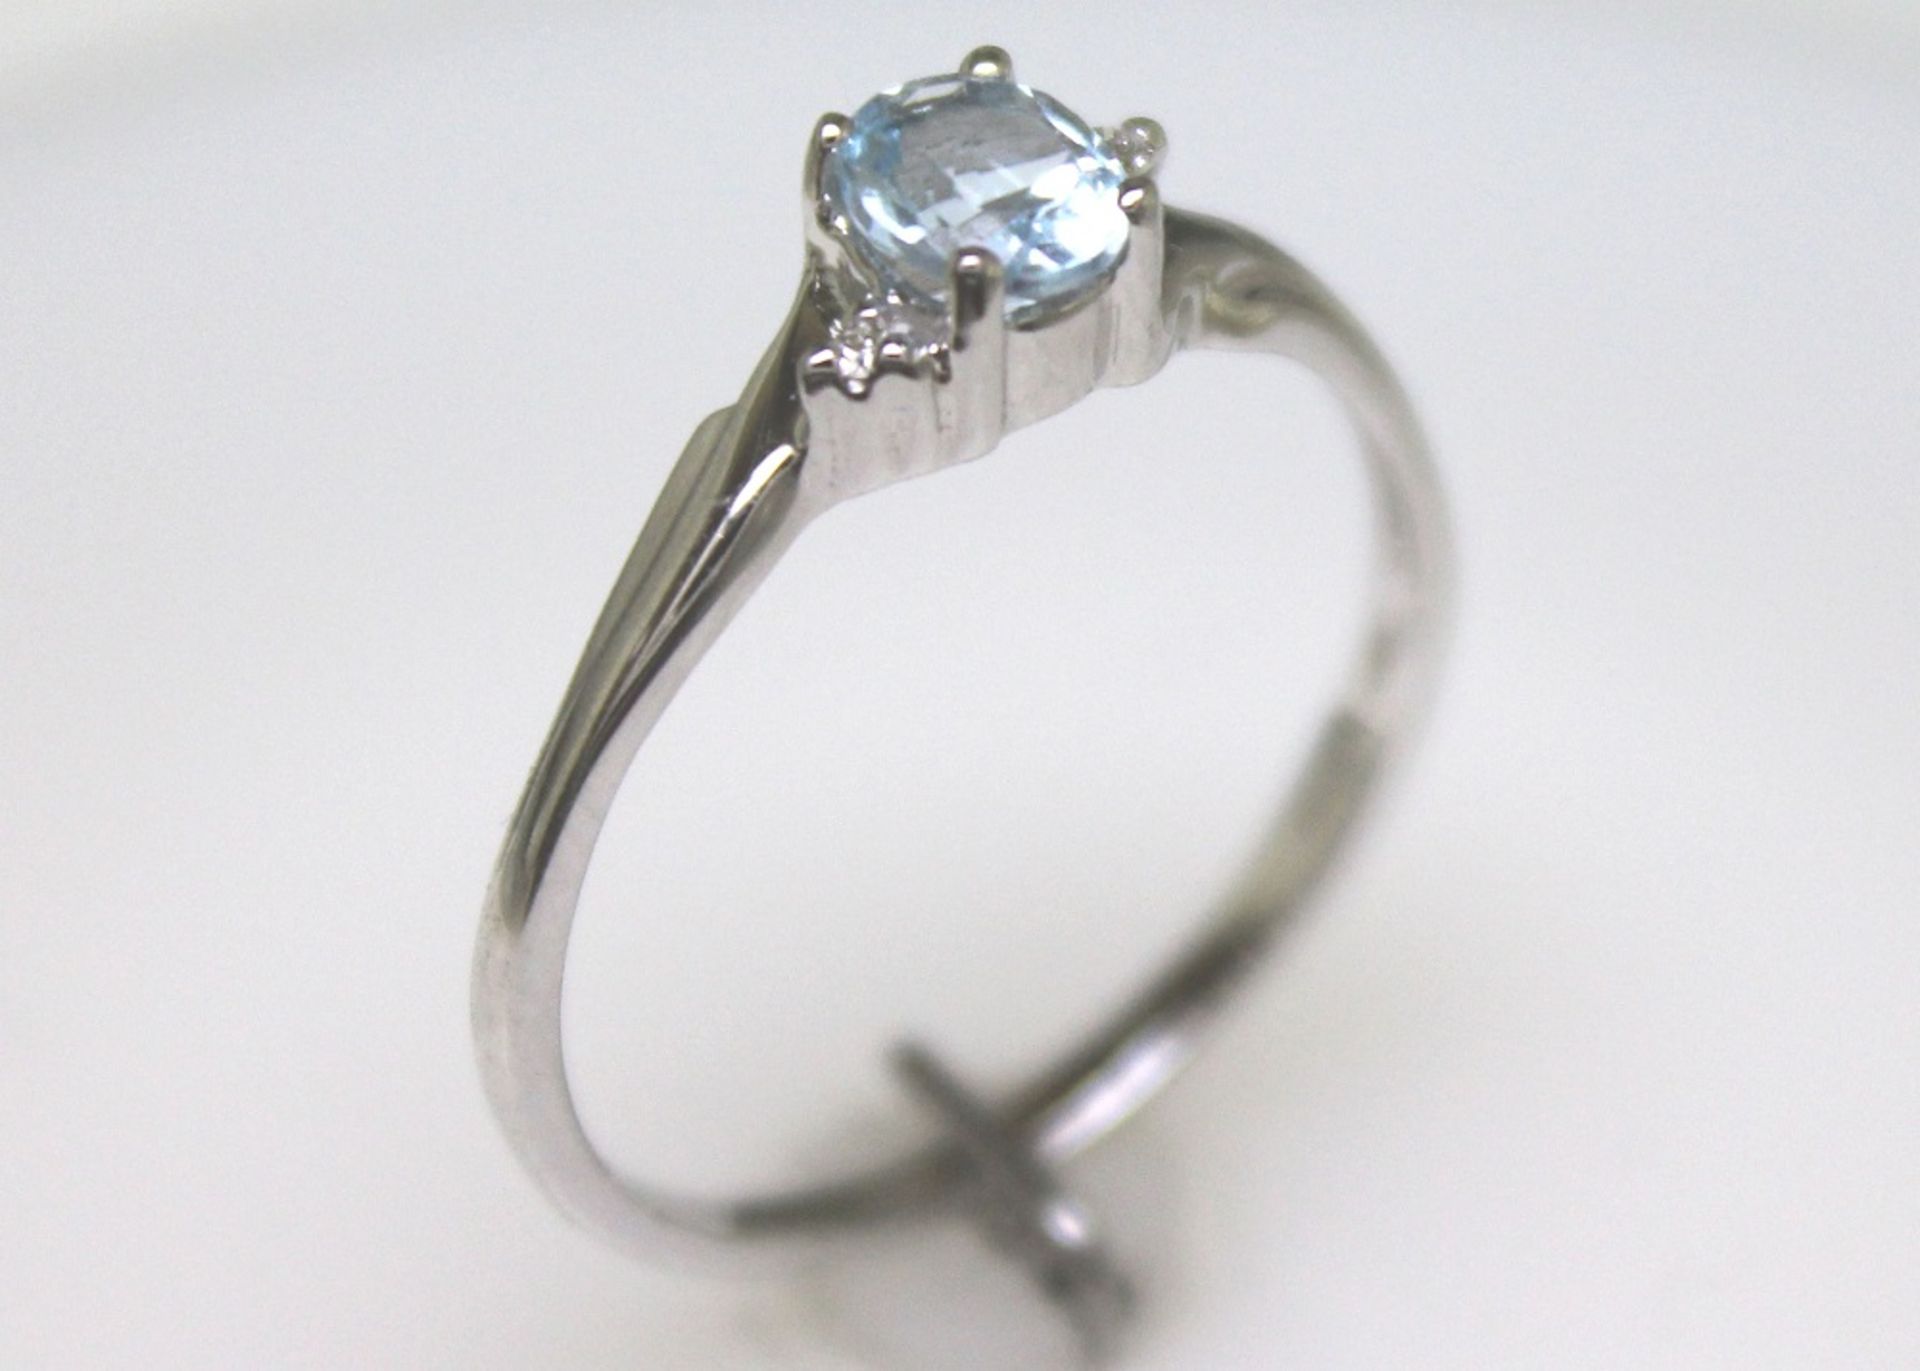 9ct White Gold Diamond and Blue Topaz Ring 0.01 Carats - Valued by GIE £755.00 - This ring - Image 7 of 9